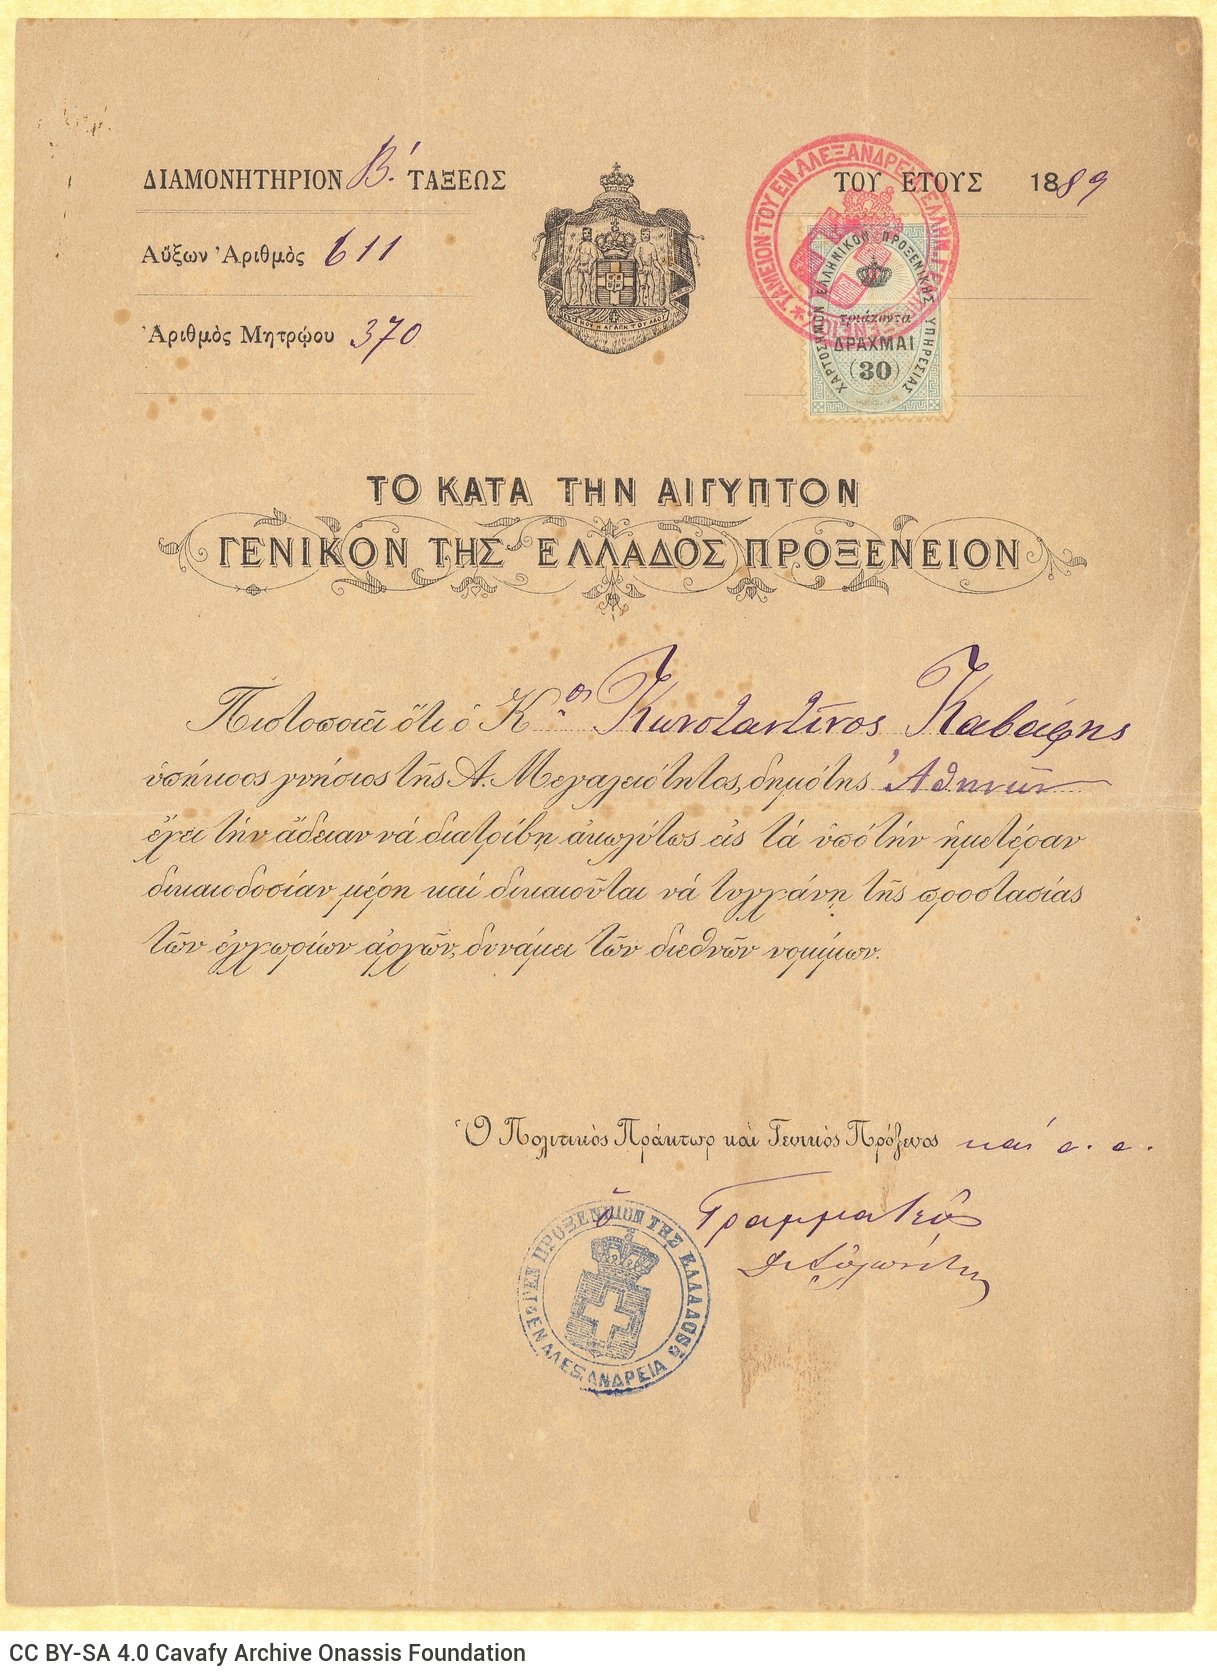 Printed permit of stay for Cavafy, issued by the Consulate General of Greece in Alexandria, valid for the year 1889. Blazo